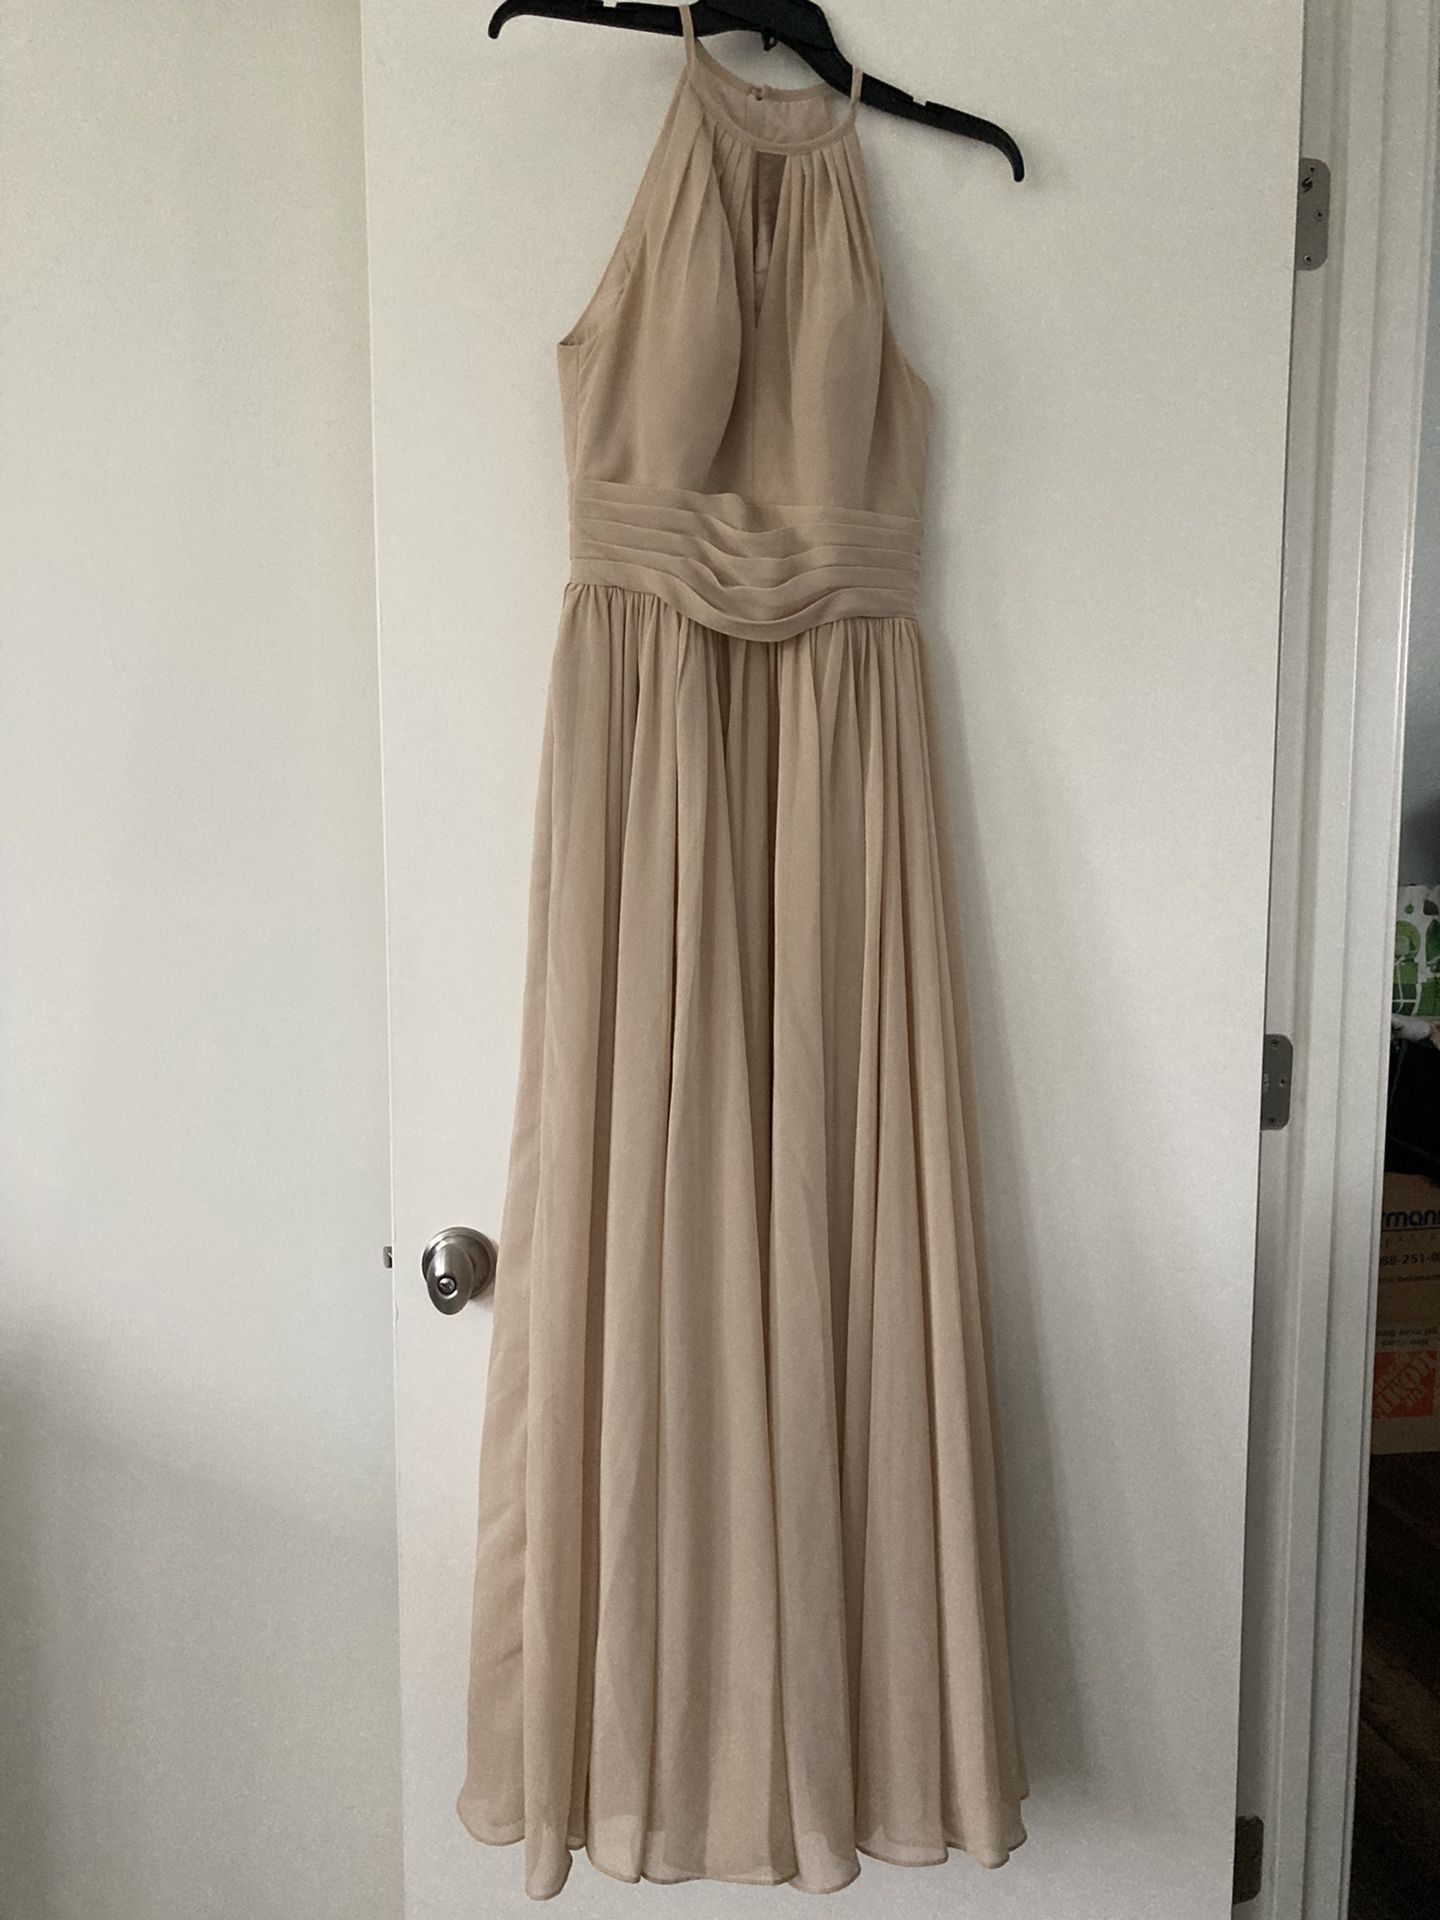 Pre-owned Azazie Cherish Bridesmaid Dress Gown - Champagne - Size 2